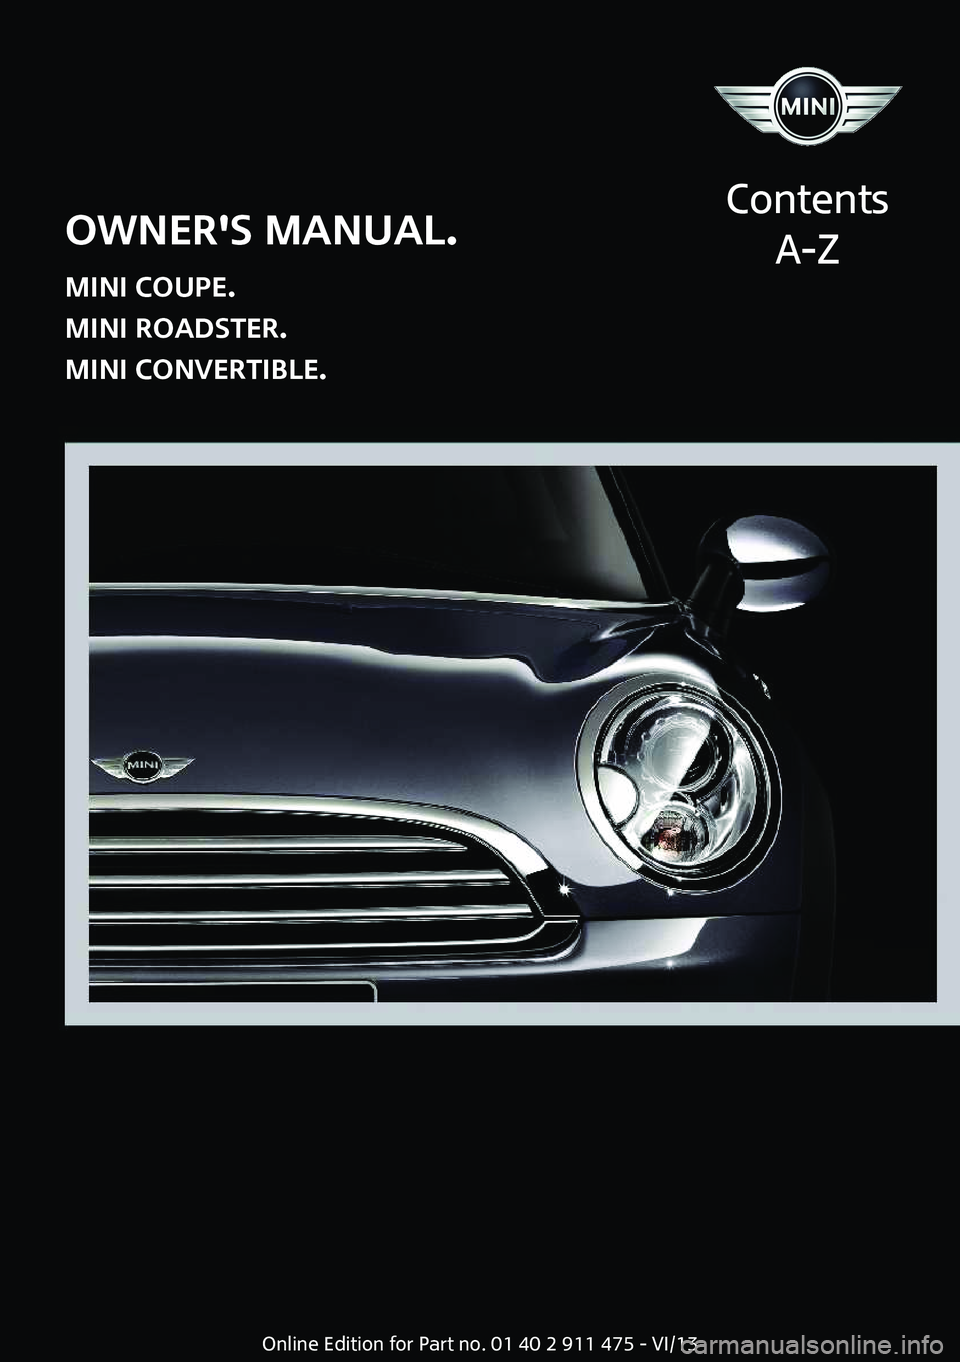 MINI COUPE ROADSTER CONVERTIBLE 2014  Owners Manual Owner's Manual.
MINI Coupe.
MINI Roadster.
MINI Convertible.
Contents
A-ZOnline Edition for Part no. 01 40 2 911 475 - VI/13  